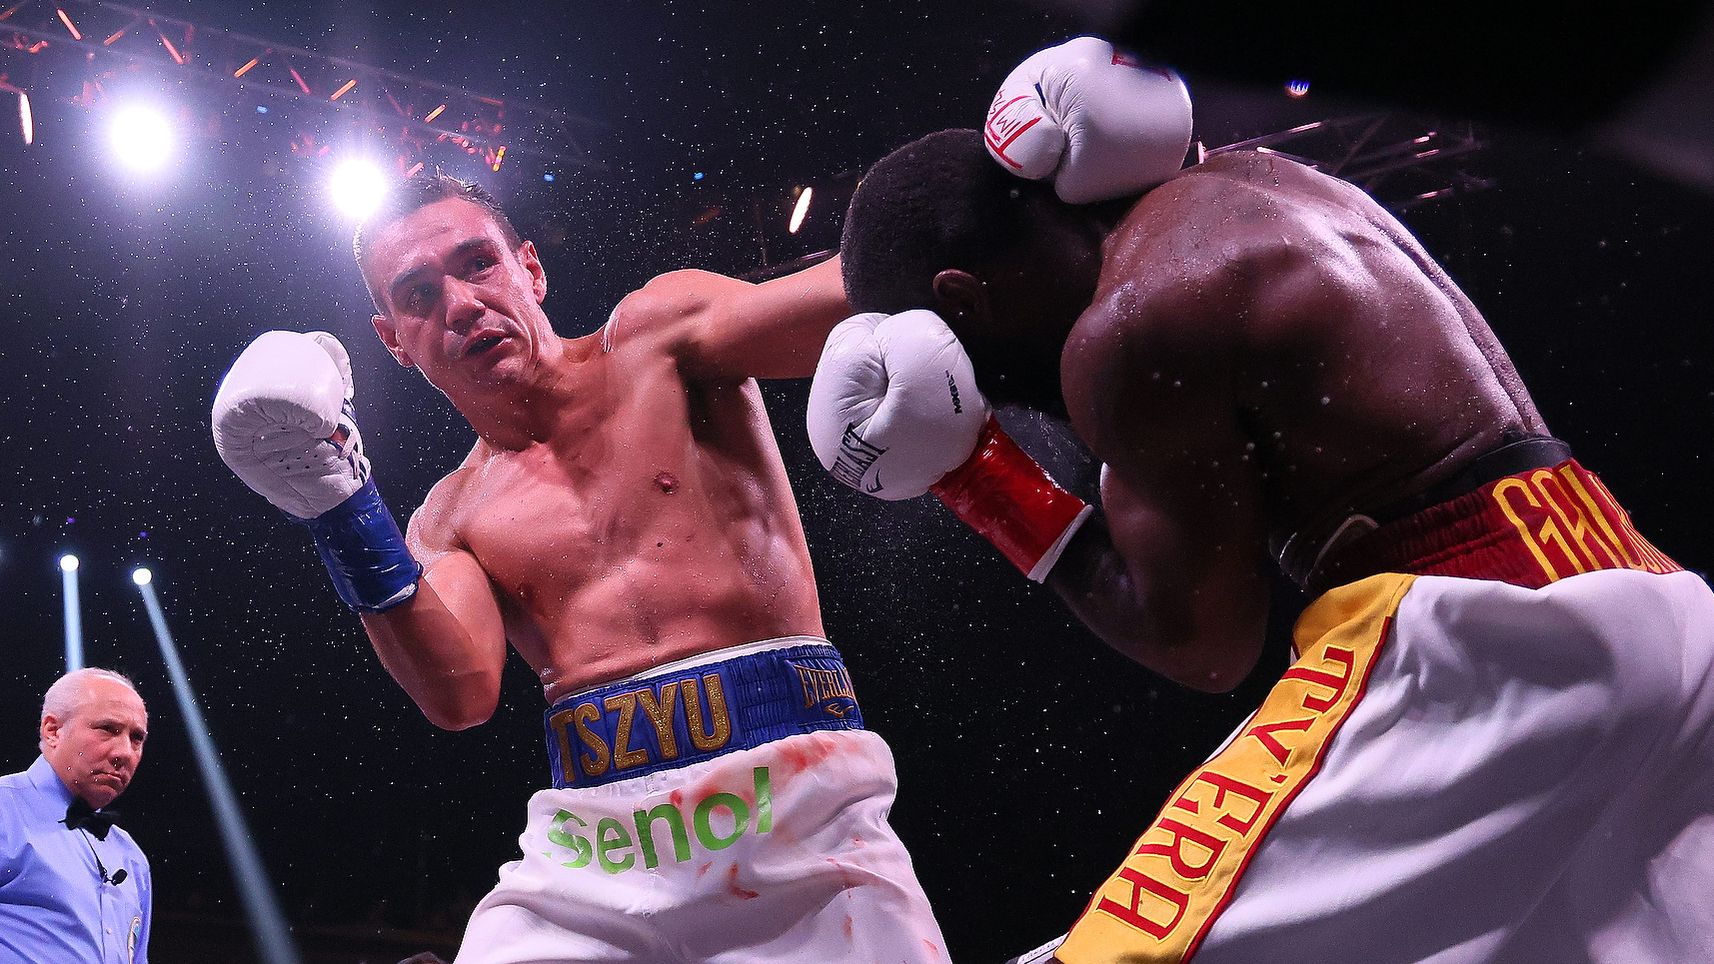 MINNEAPOLIS, MN - MARCH 26: Tim Tszyu (white with blue trunks) v Terrell Gausha (white with red and gold trunks) box in the Super Welterweight main event at the Armory on March 26, 2022 in Minneapolis, United States. Tszyu, in his USA debut defeated Gausha by judges decision. (Photo by Adam Bettcher/Getty Images)